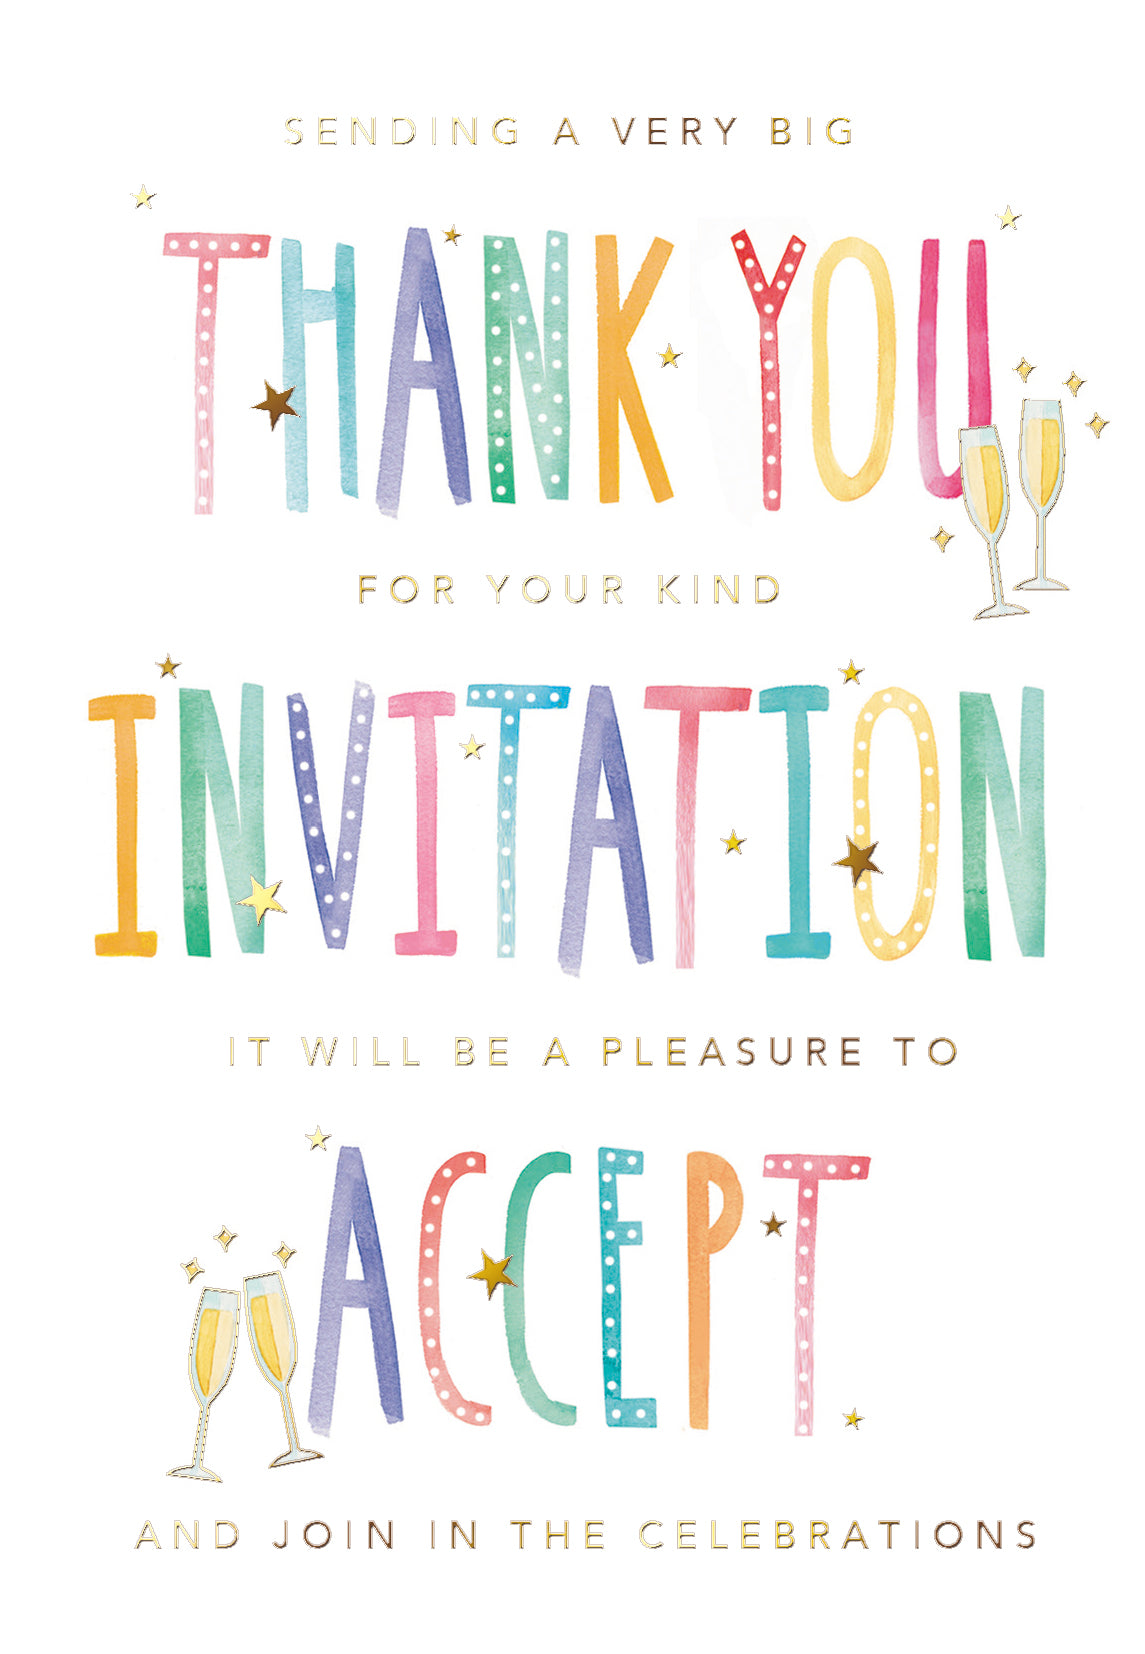 Invitation Be A Pleasure To Accept Acceptance Greeting Card